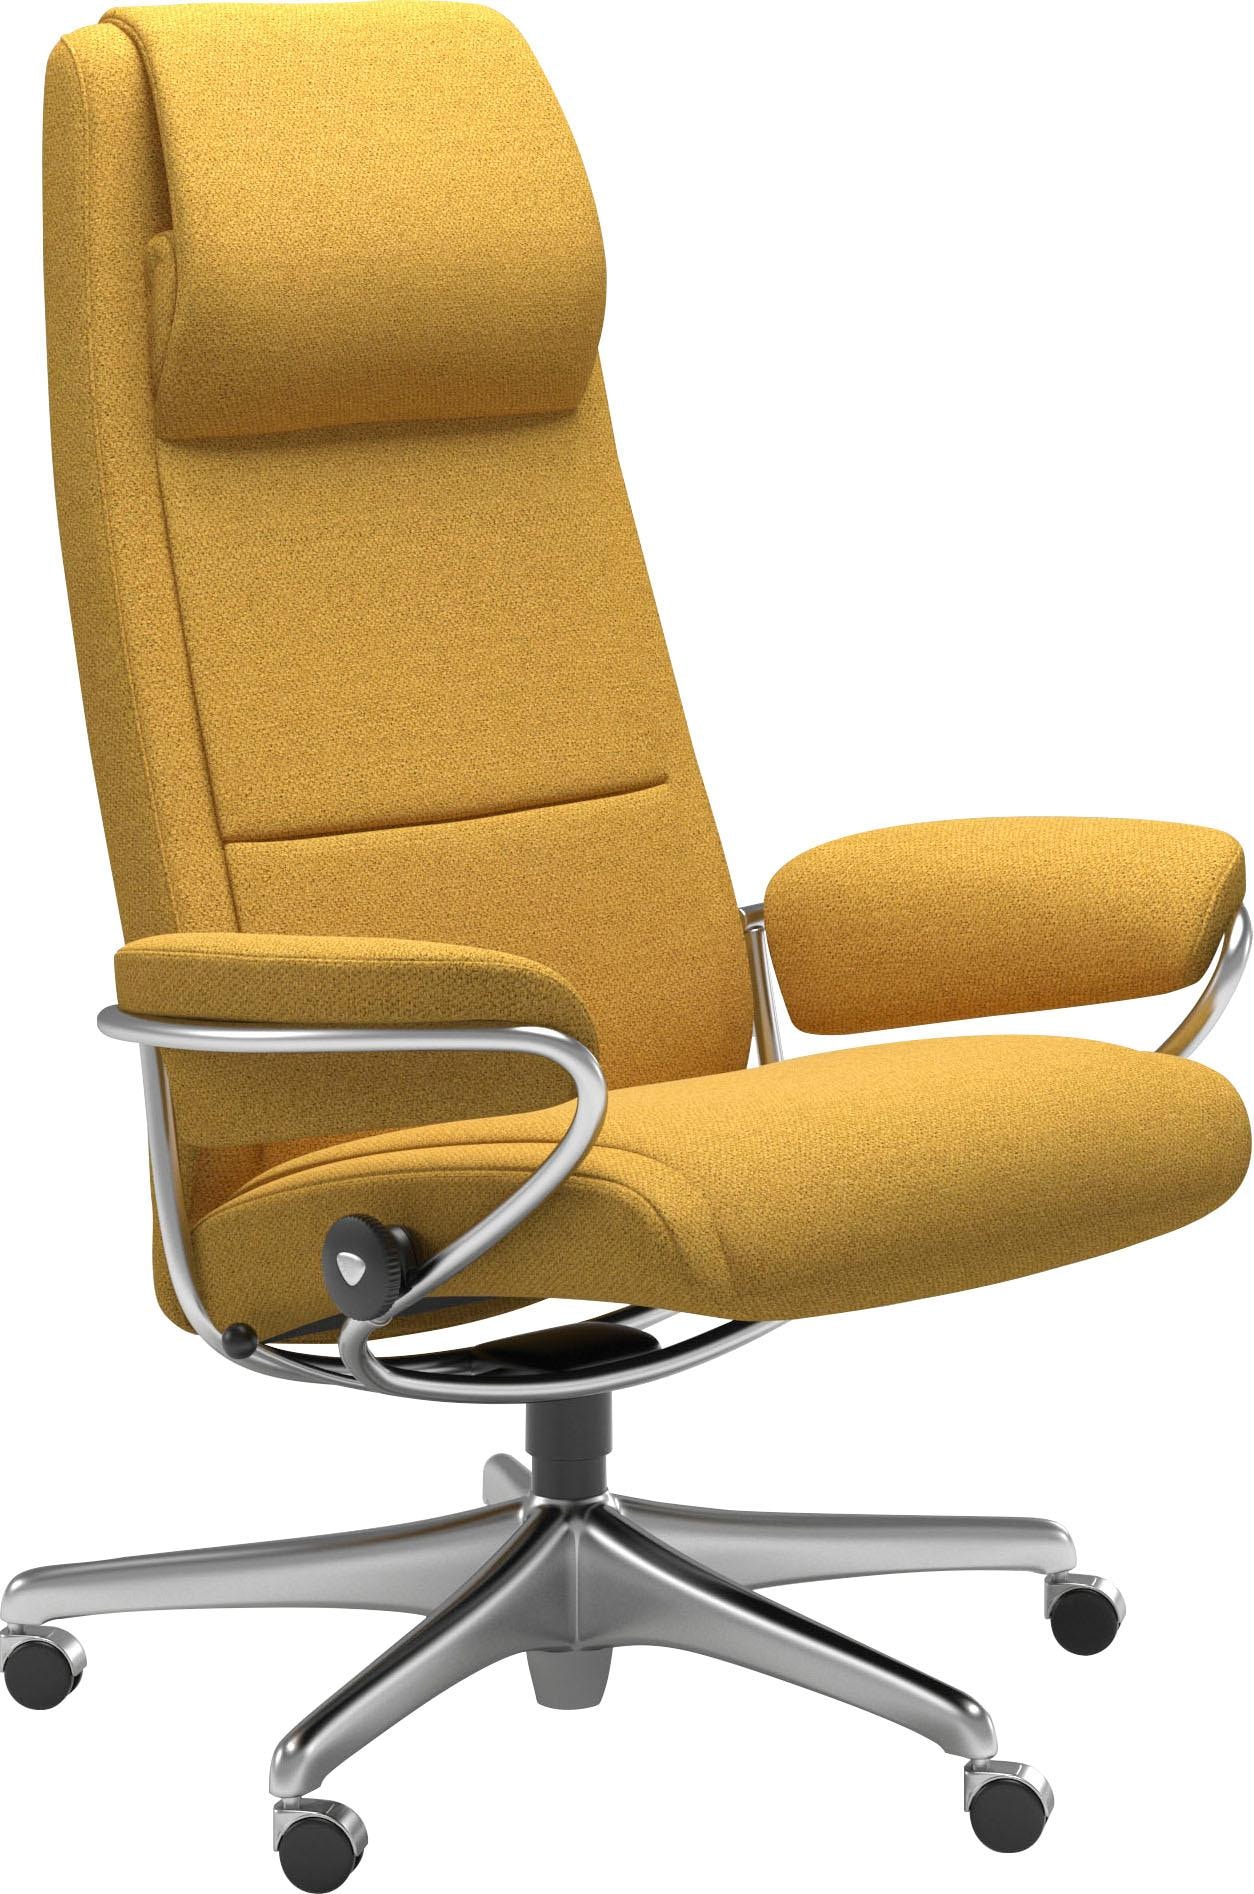 Online Office OTTO Home Chrom Gestell High Back, mit Relaxsessel Stressless® Shop »Paris«, Base,